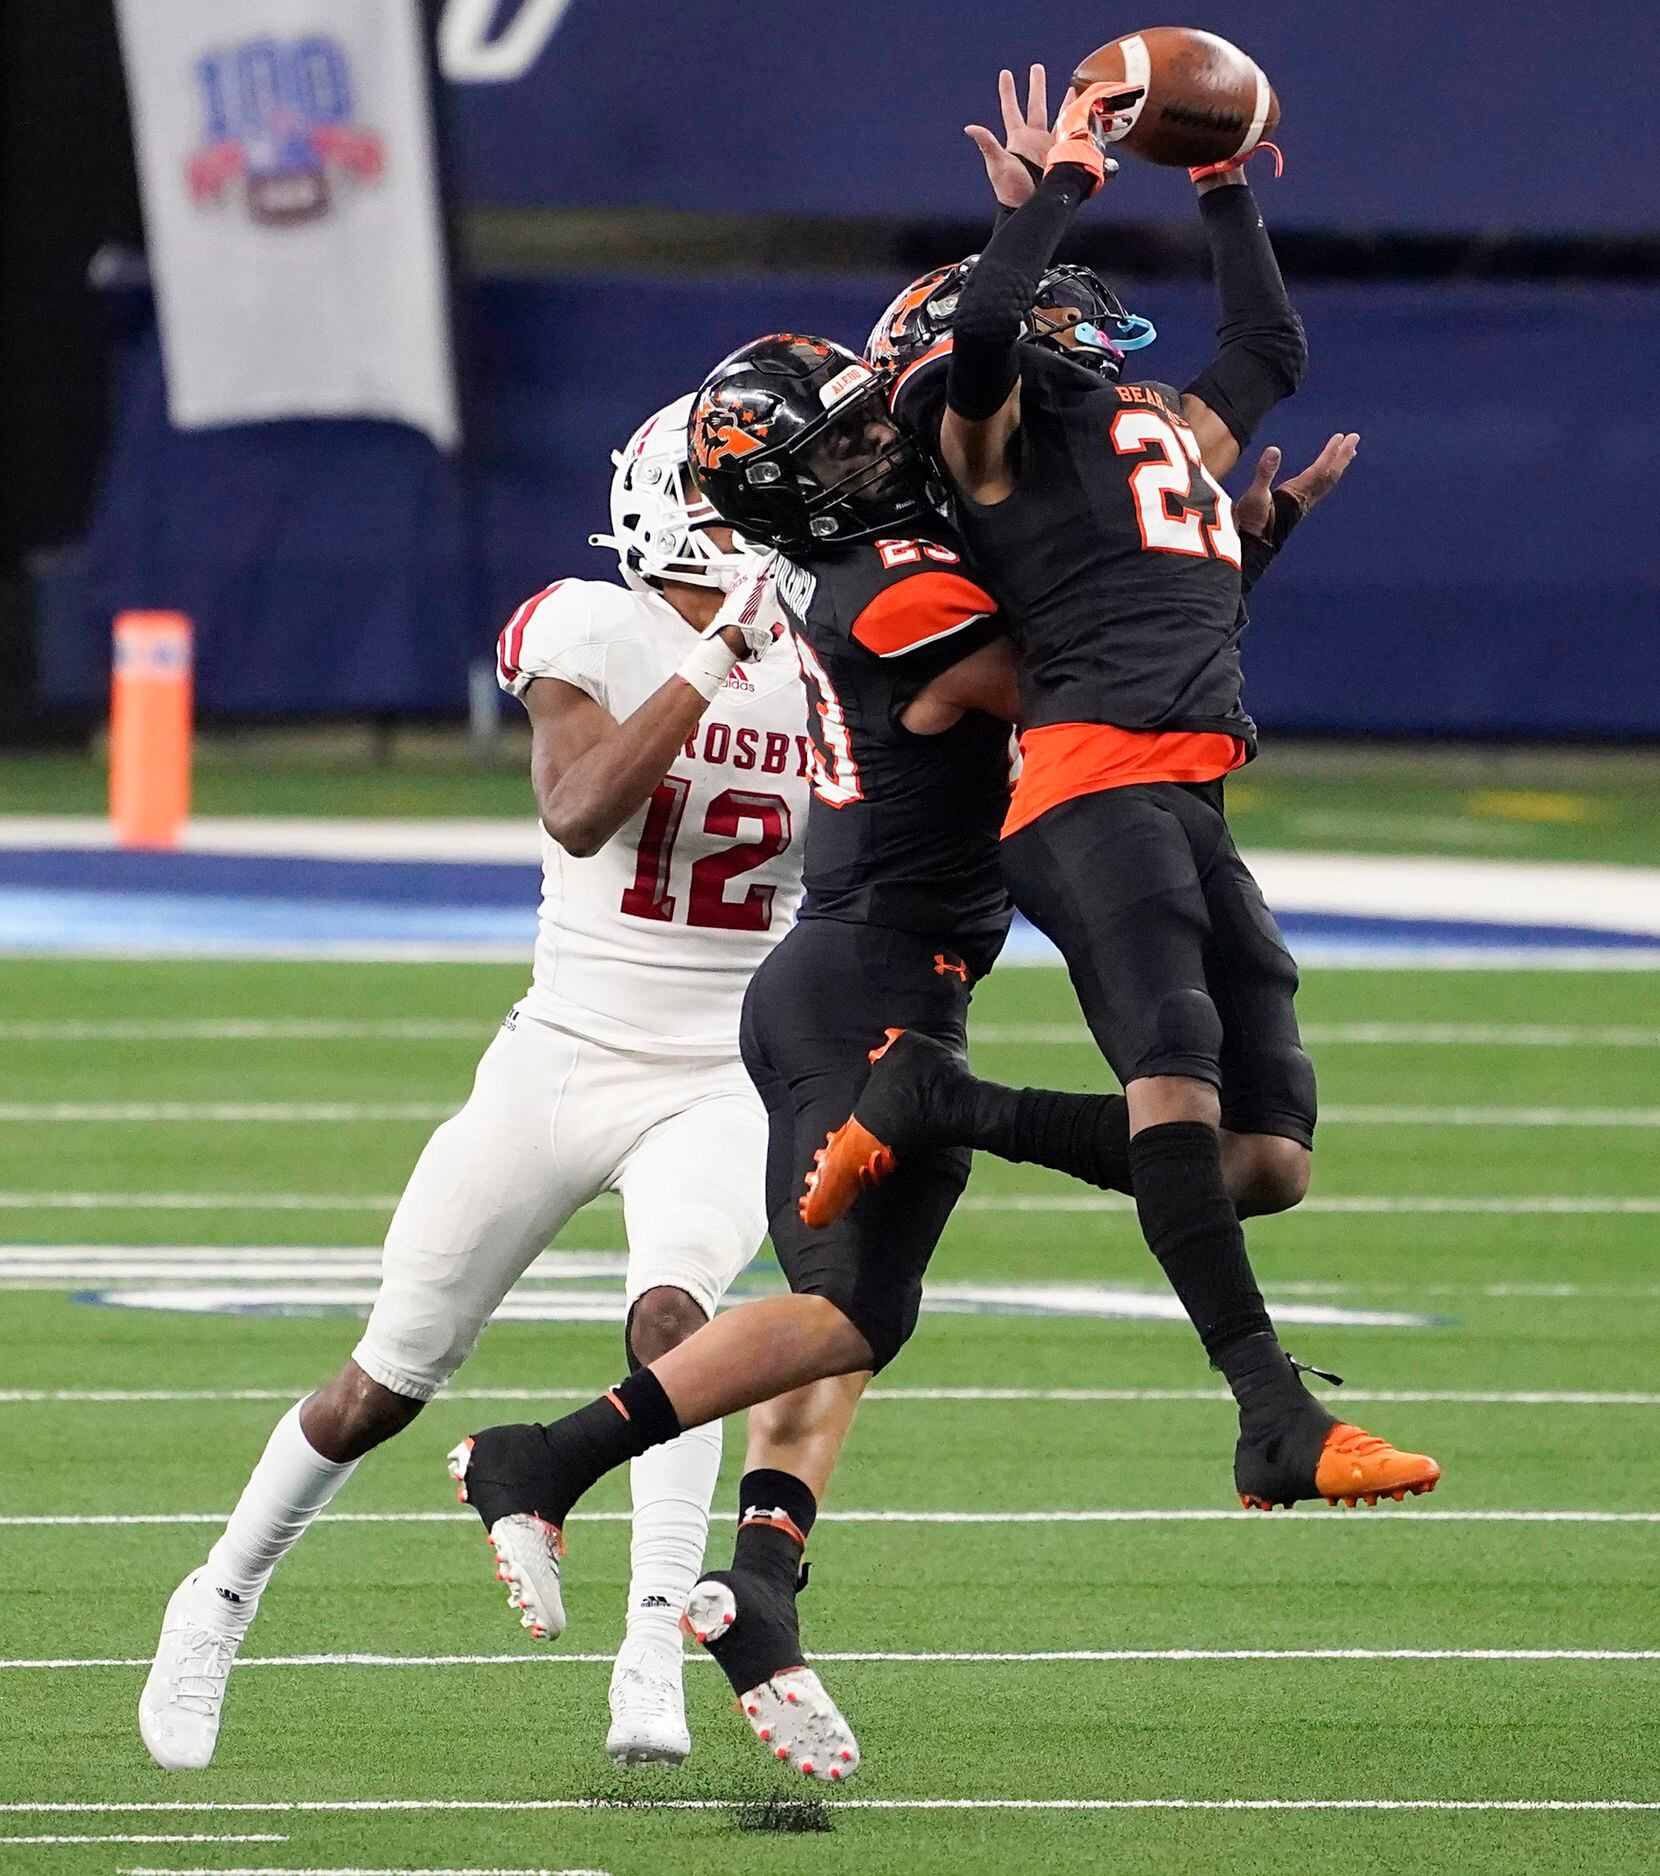 Aledo defenders Jaden Allen (27) and Elijah Valencia (23) break up a pass intended for Crosby wide receiver Jaylen Herman (12) during the second half of a 56-21 victory over Crosby to win the Class 5A Division II state football championship game at AT&T Stadium on Friday, Jan. 15, 2021, in Arlington. The victory gave the Bearcats the 10th state championship in school history. (Smiley N. Pool/The Dallas Morning News)